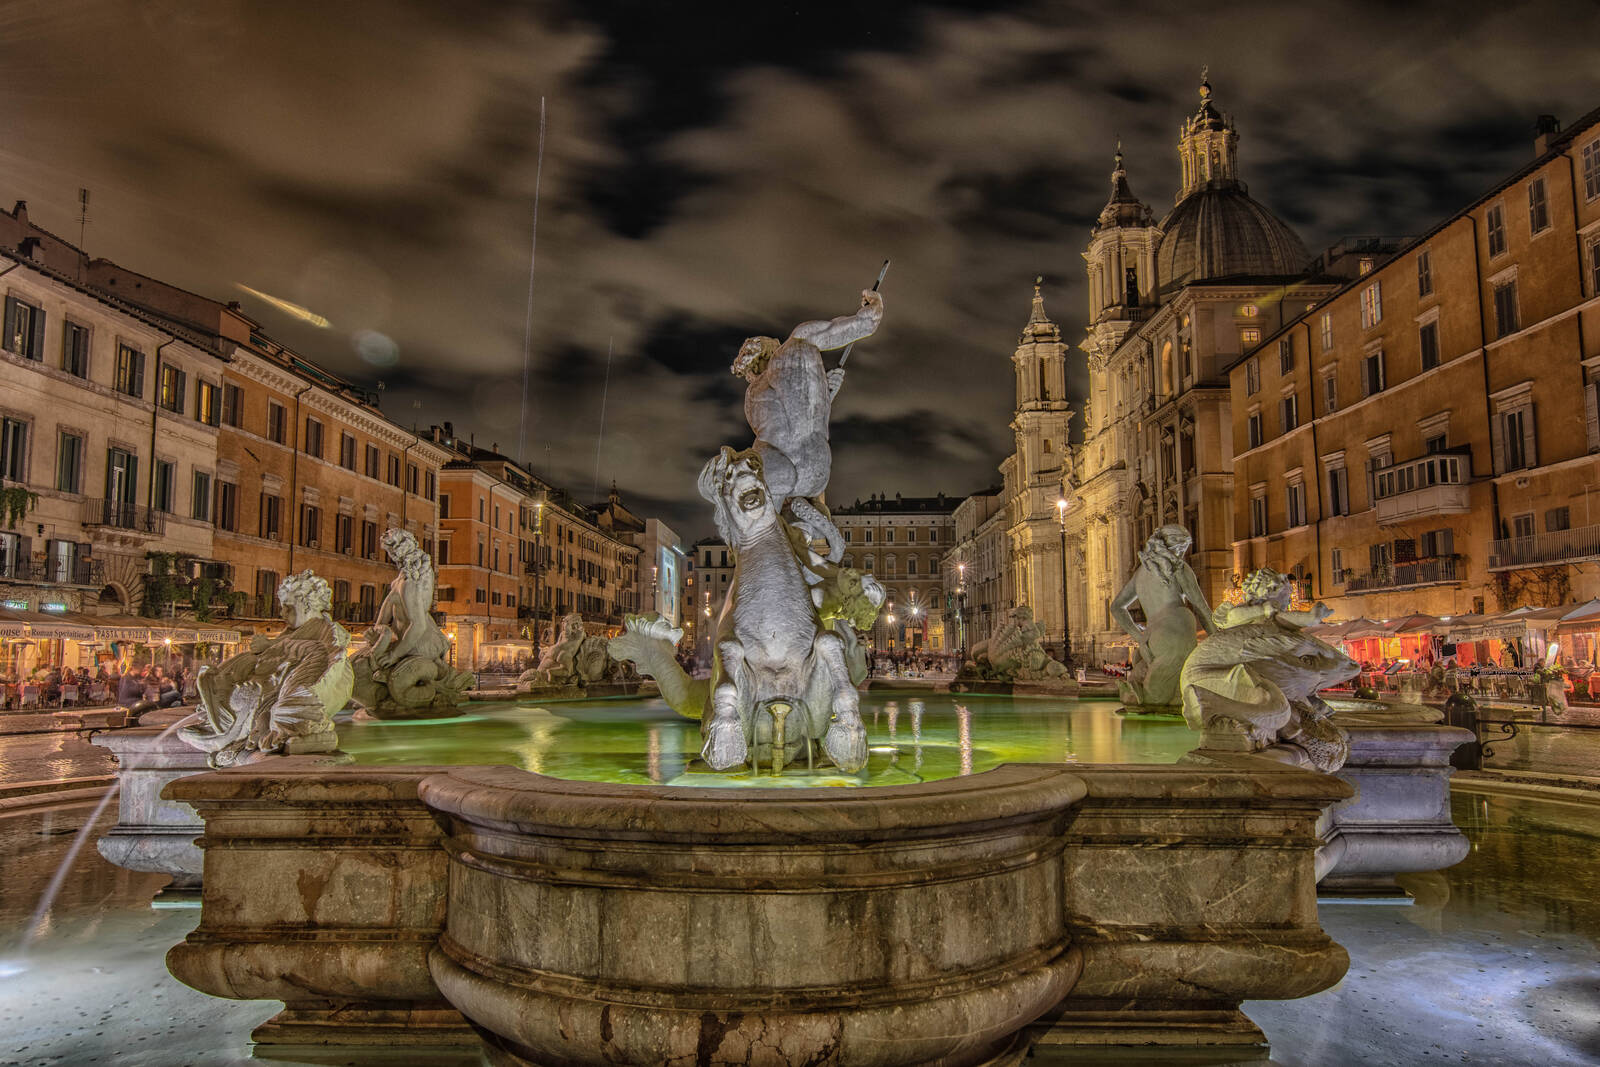 Image of Piazza Navona by Guy Bostijn